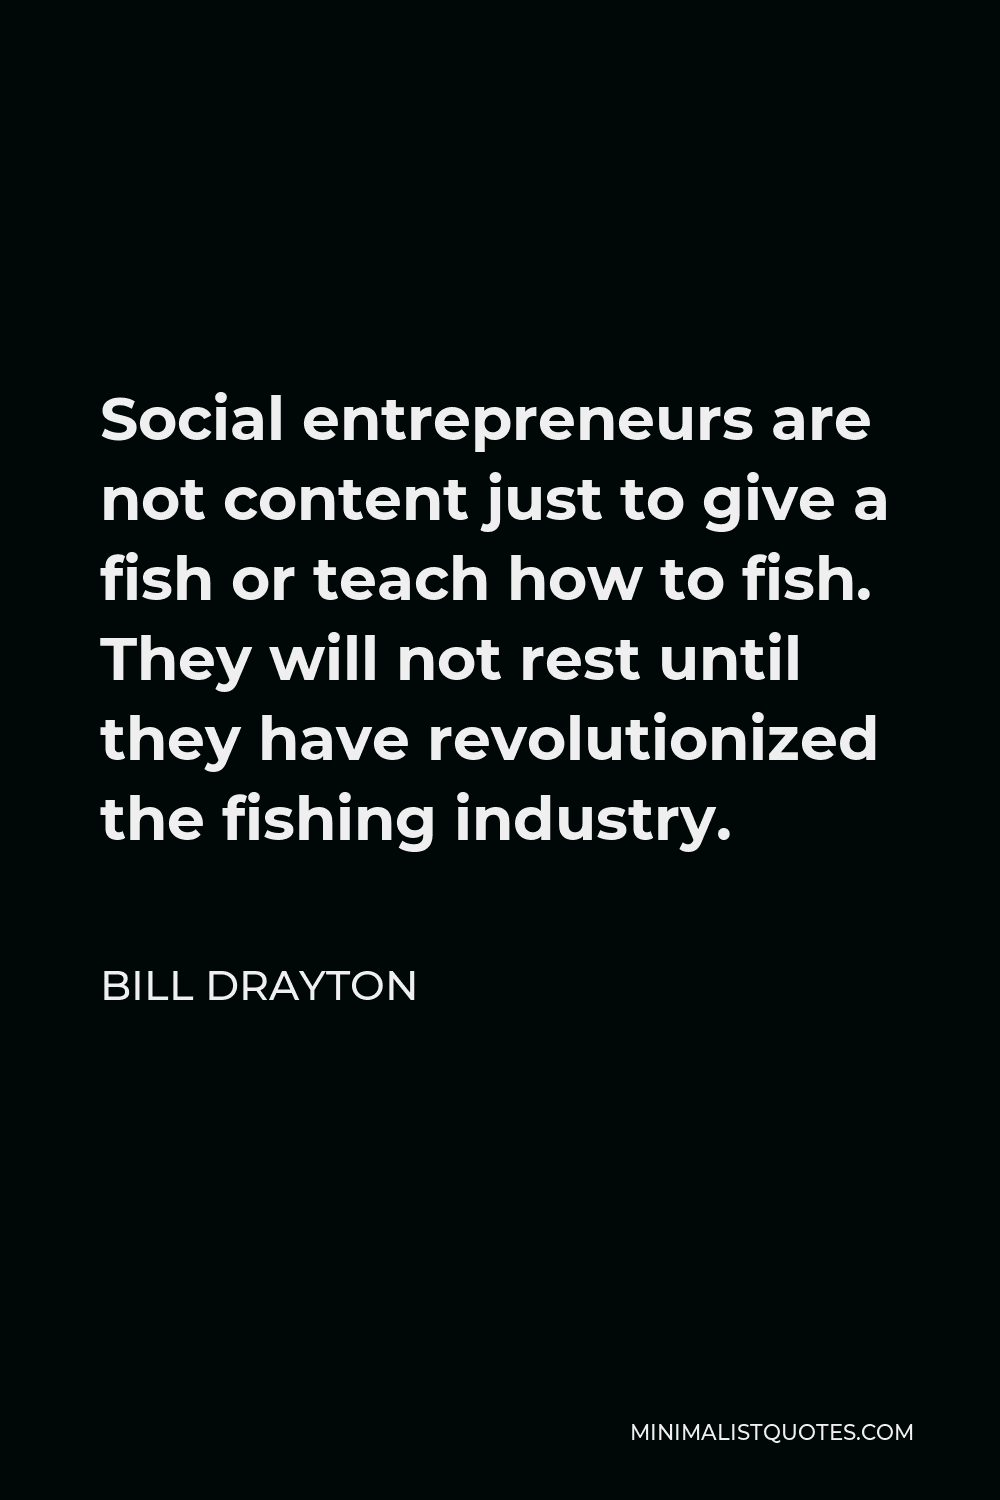 Bill Drayton Quote - Social entrepreneurs are not content just to give a fish or teach how to fish. They will not rest until they have revolutionized the fishing industry.